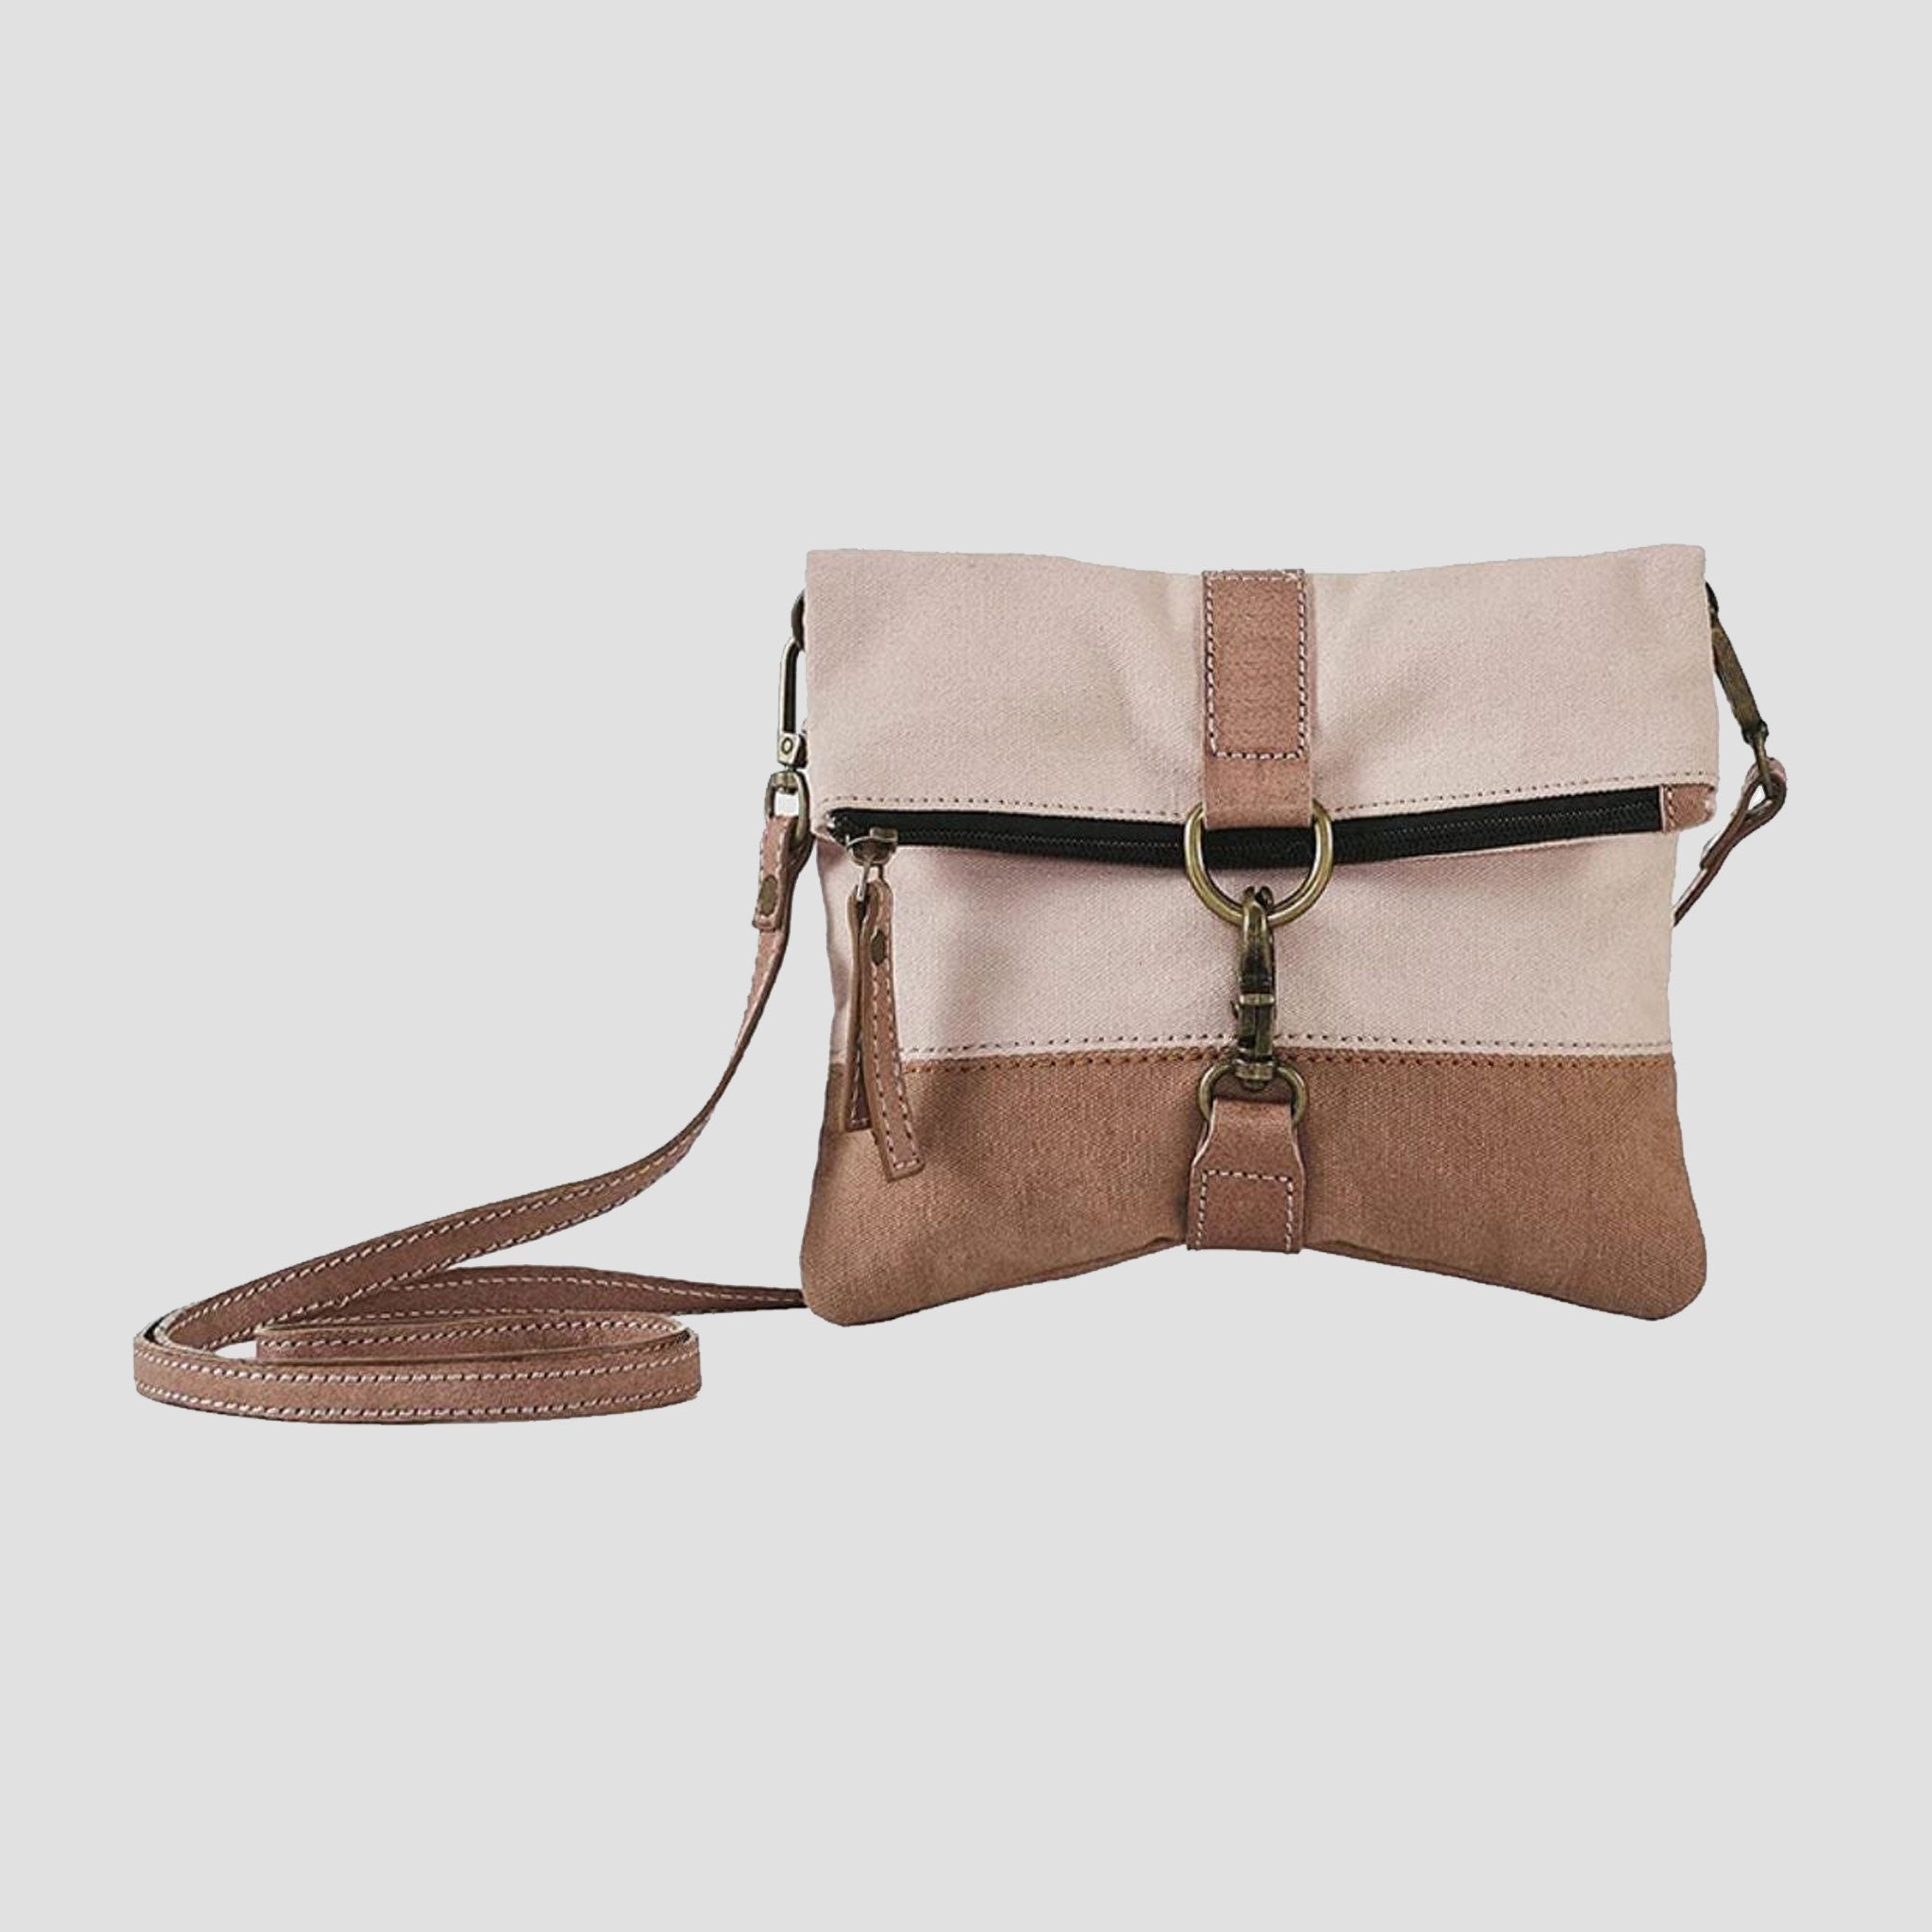 Mona B Finley Canvas Bag Recycled Sling Bag For Women and Girls (Pink) - Crossbody Sling Bag by Mona-B - Backpack, EOSS, Flash Sale, Sale, Shop1999, Shop2999, Shop3999